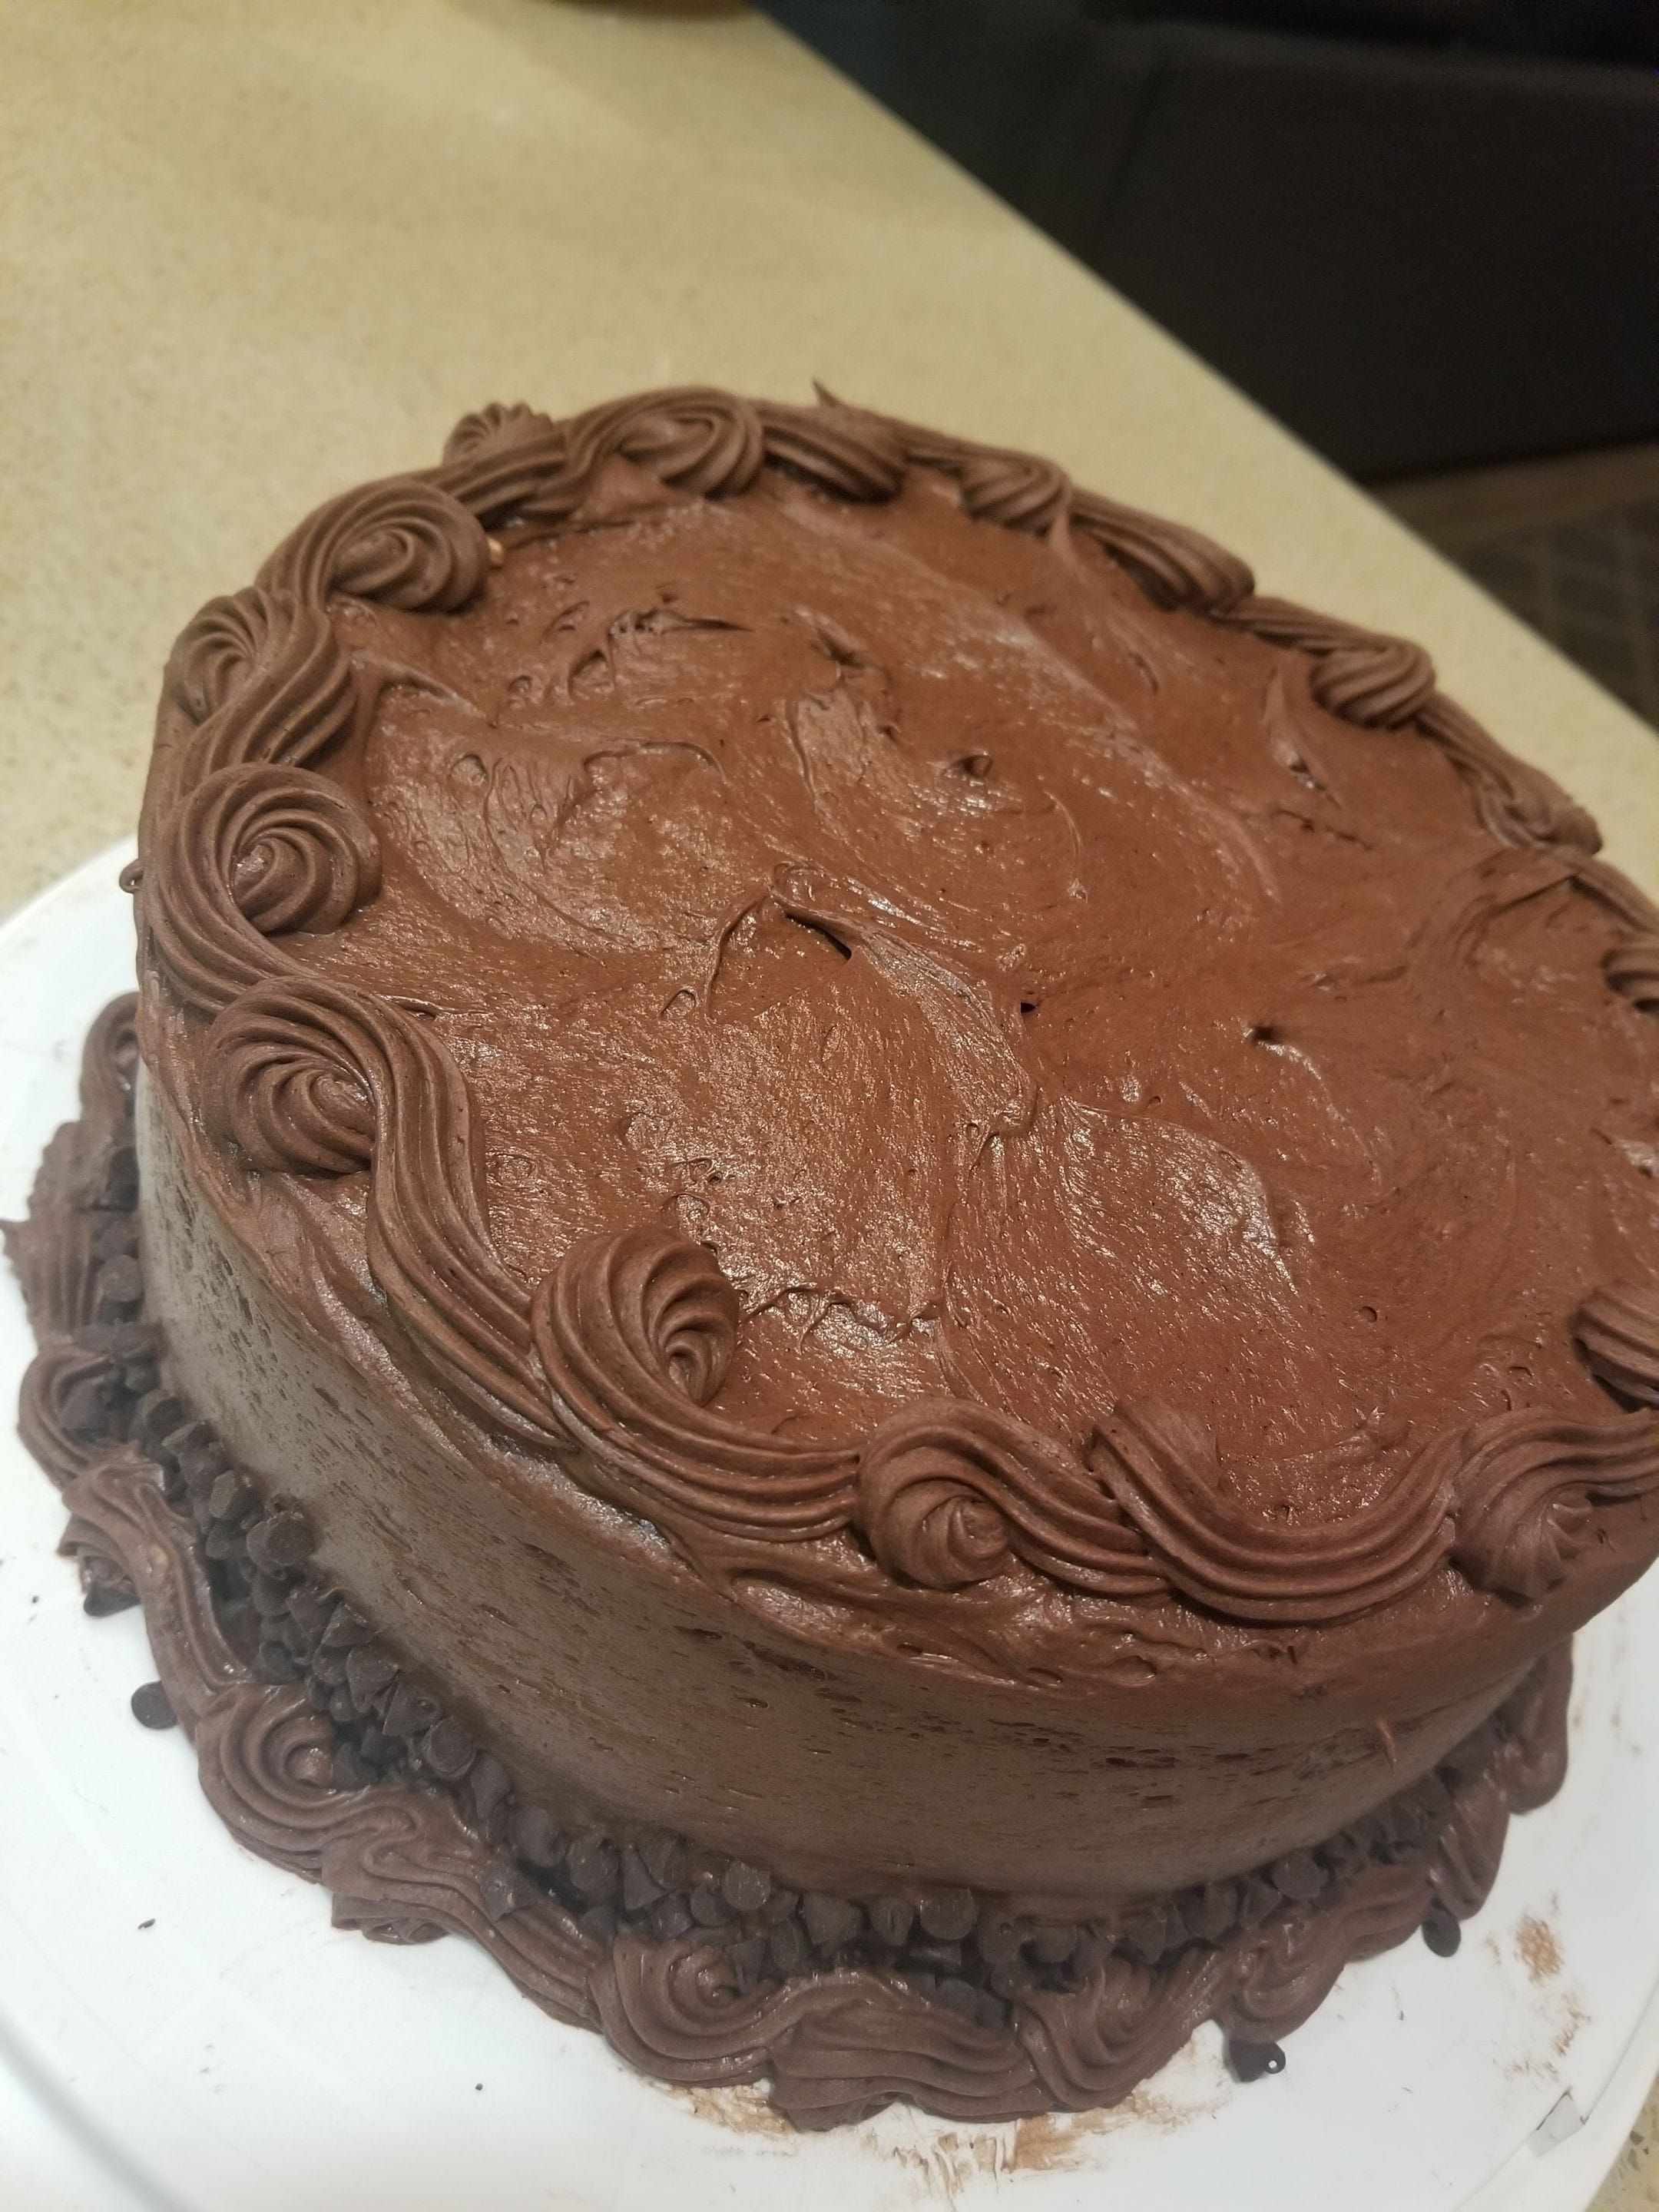 Chocolate cake layered with chocolate cream cheese butterceam frosting